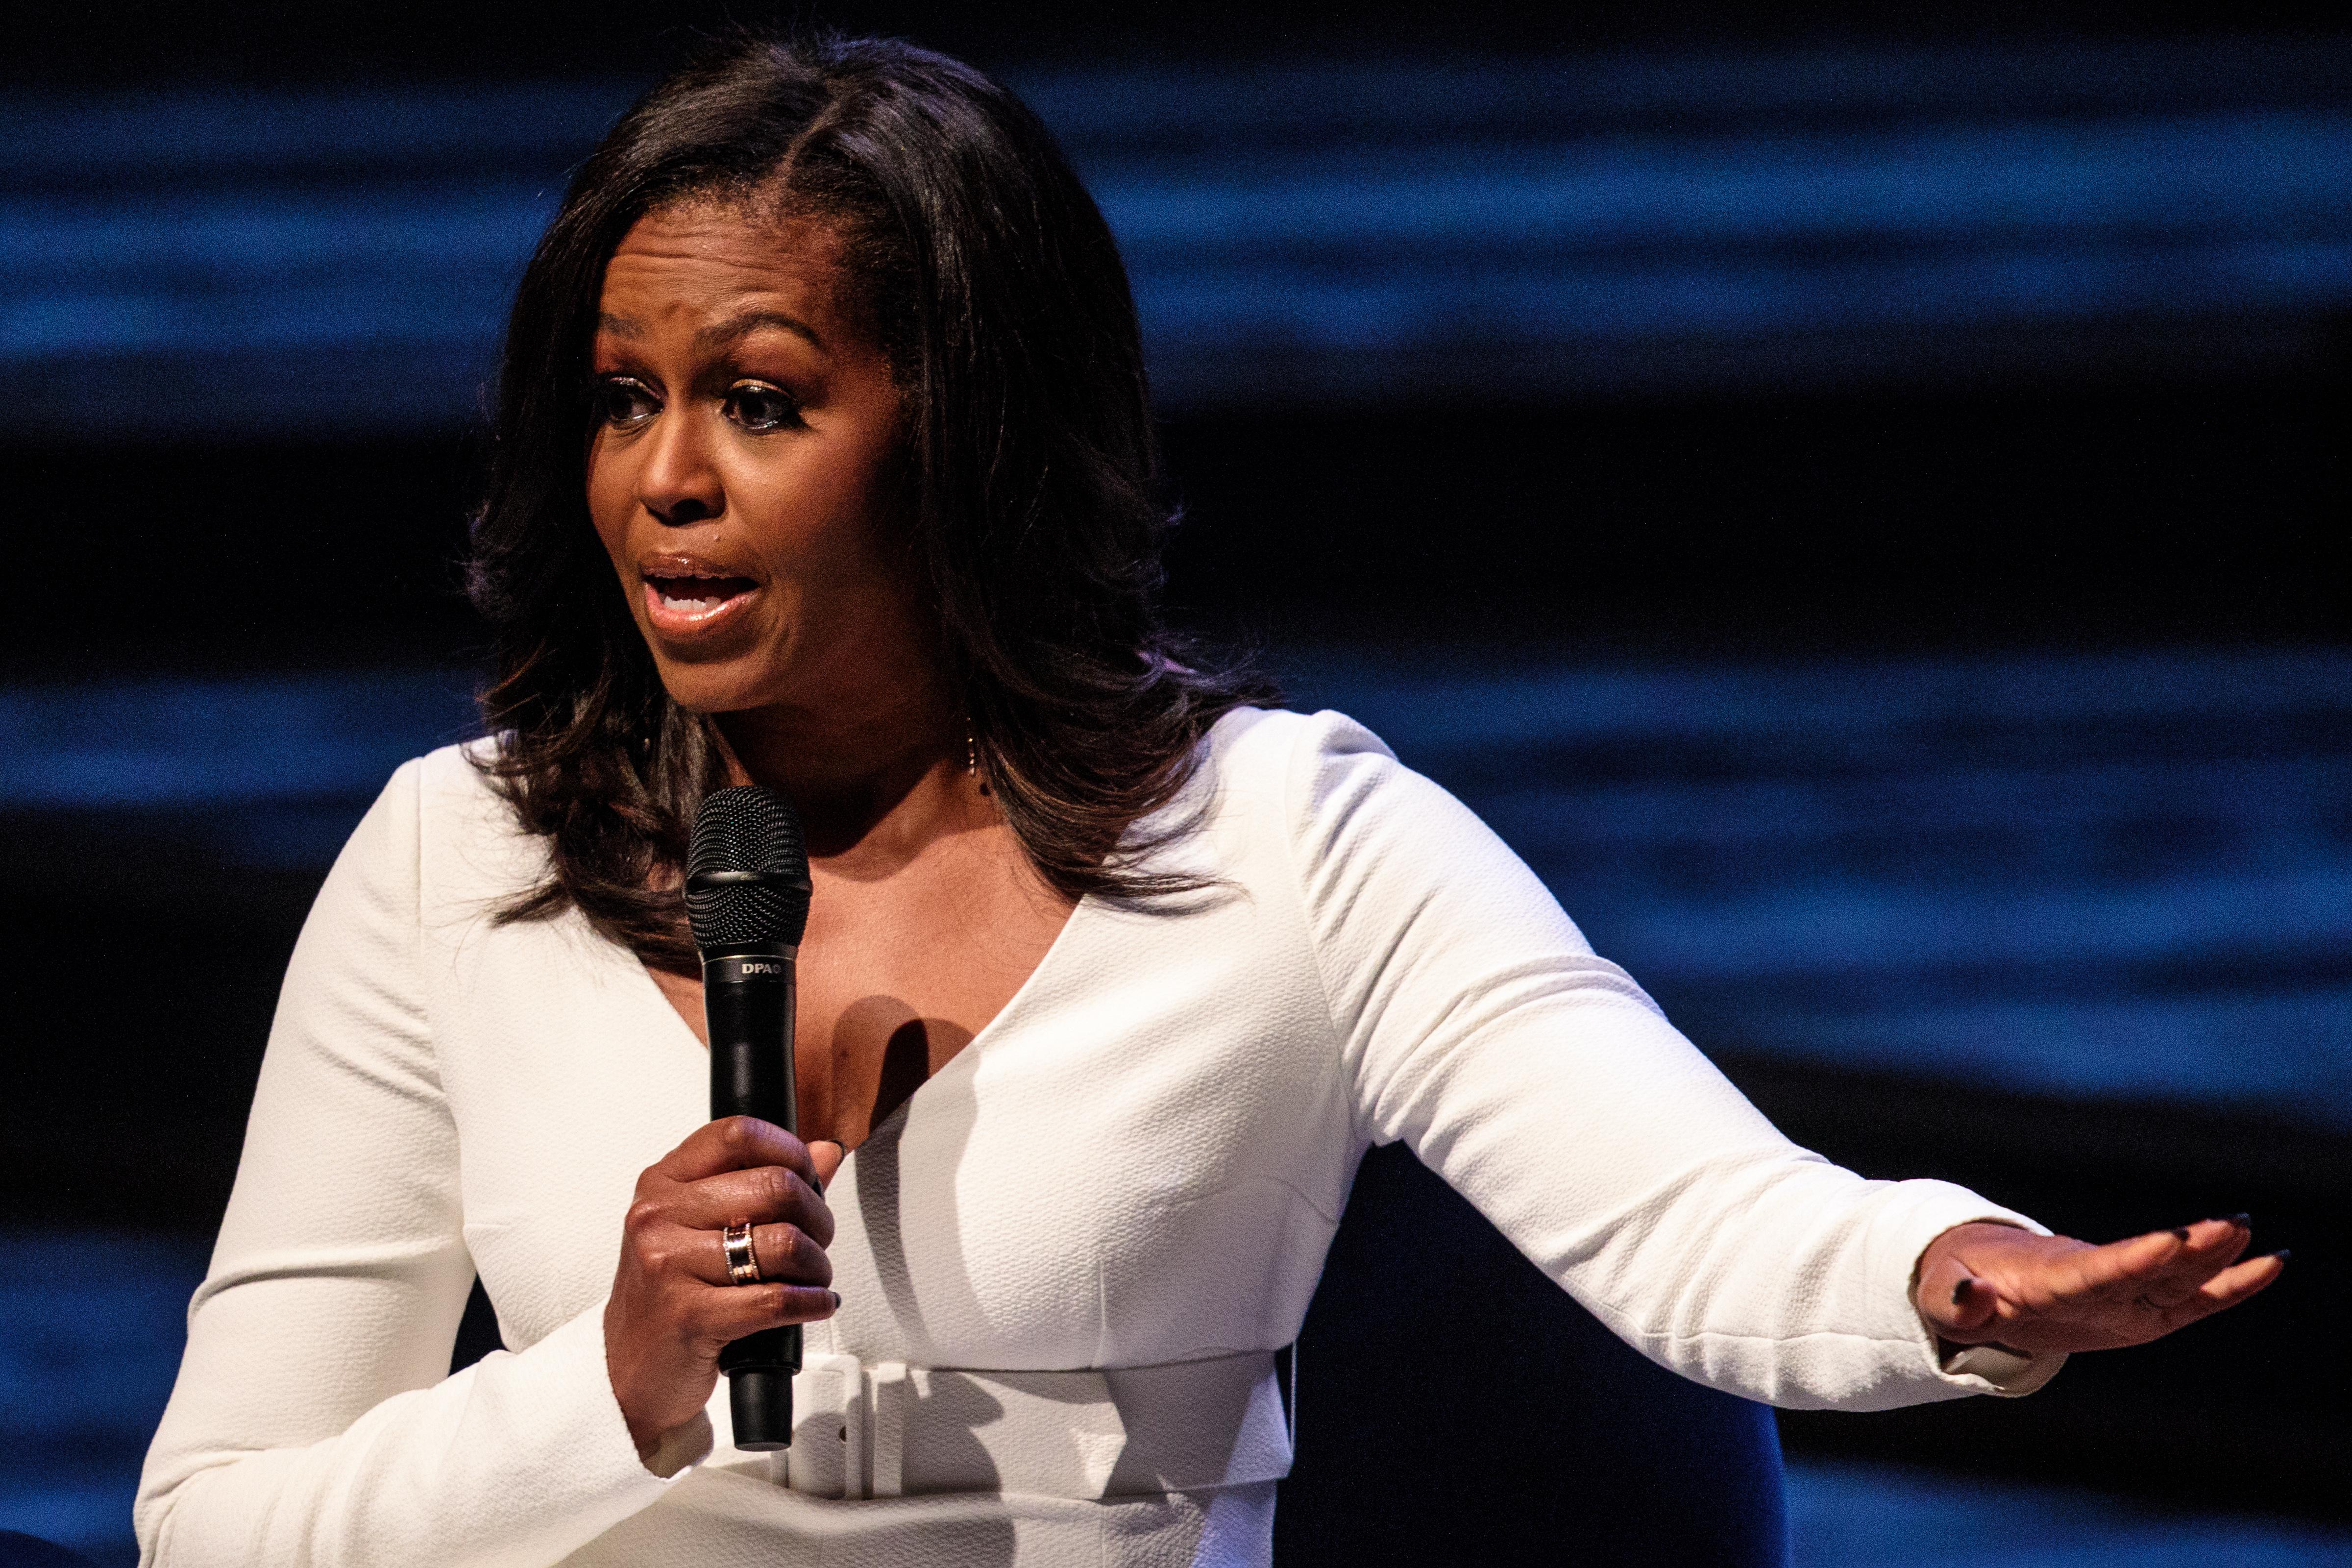 Former U.S. First Lady Michelle Obama speaks onstage, wearing a white pantsuit